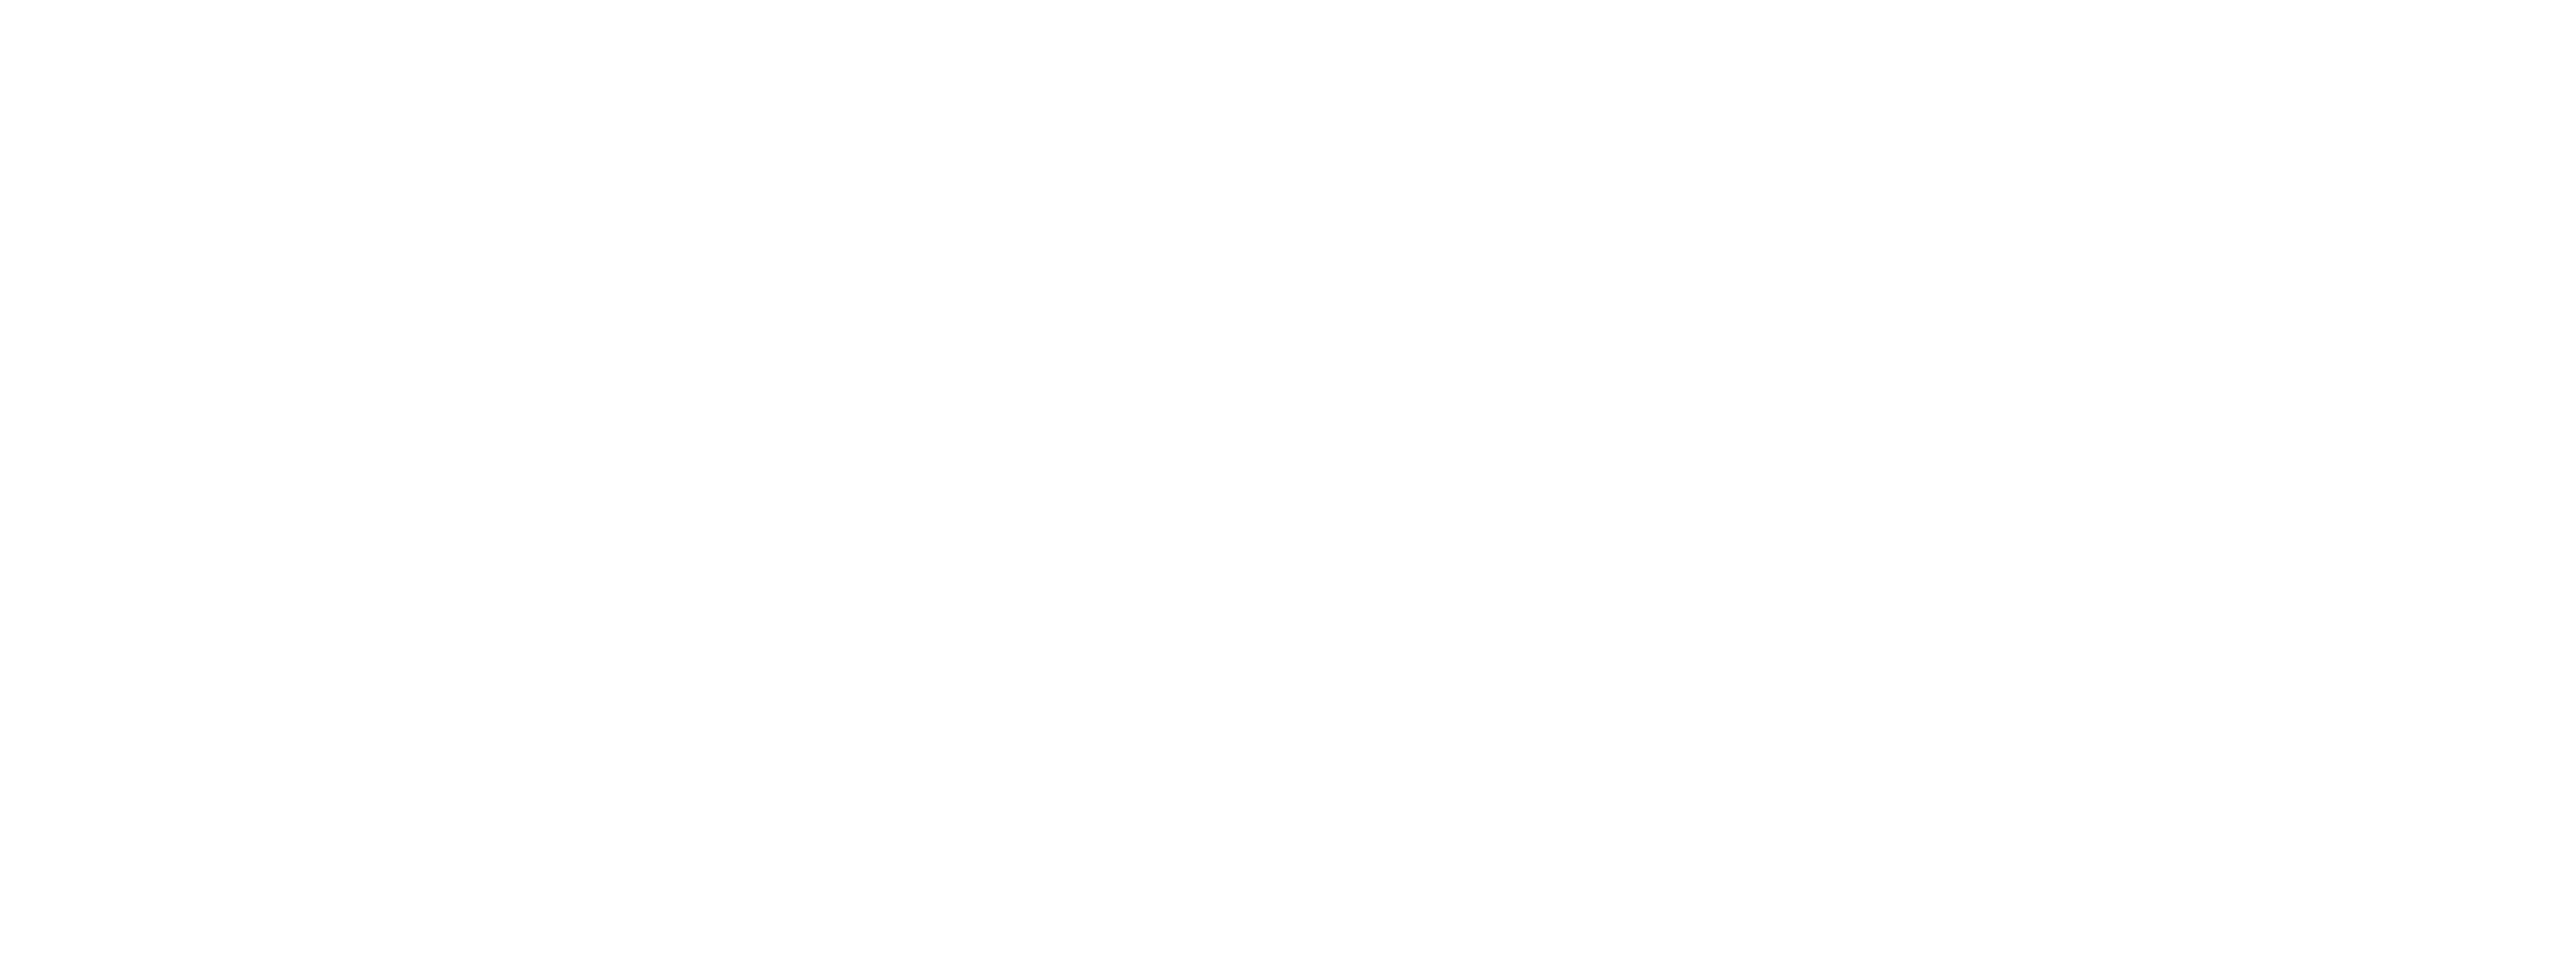 Innovate Elevate Youth Conference